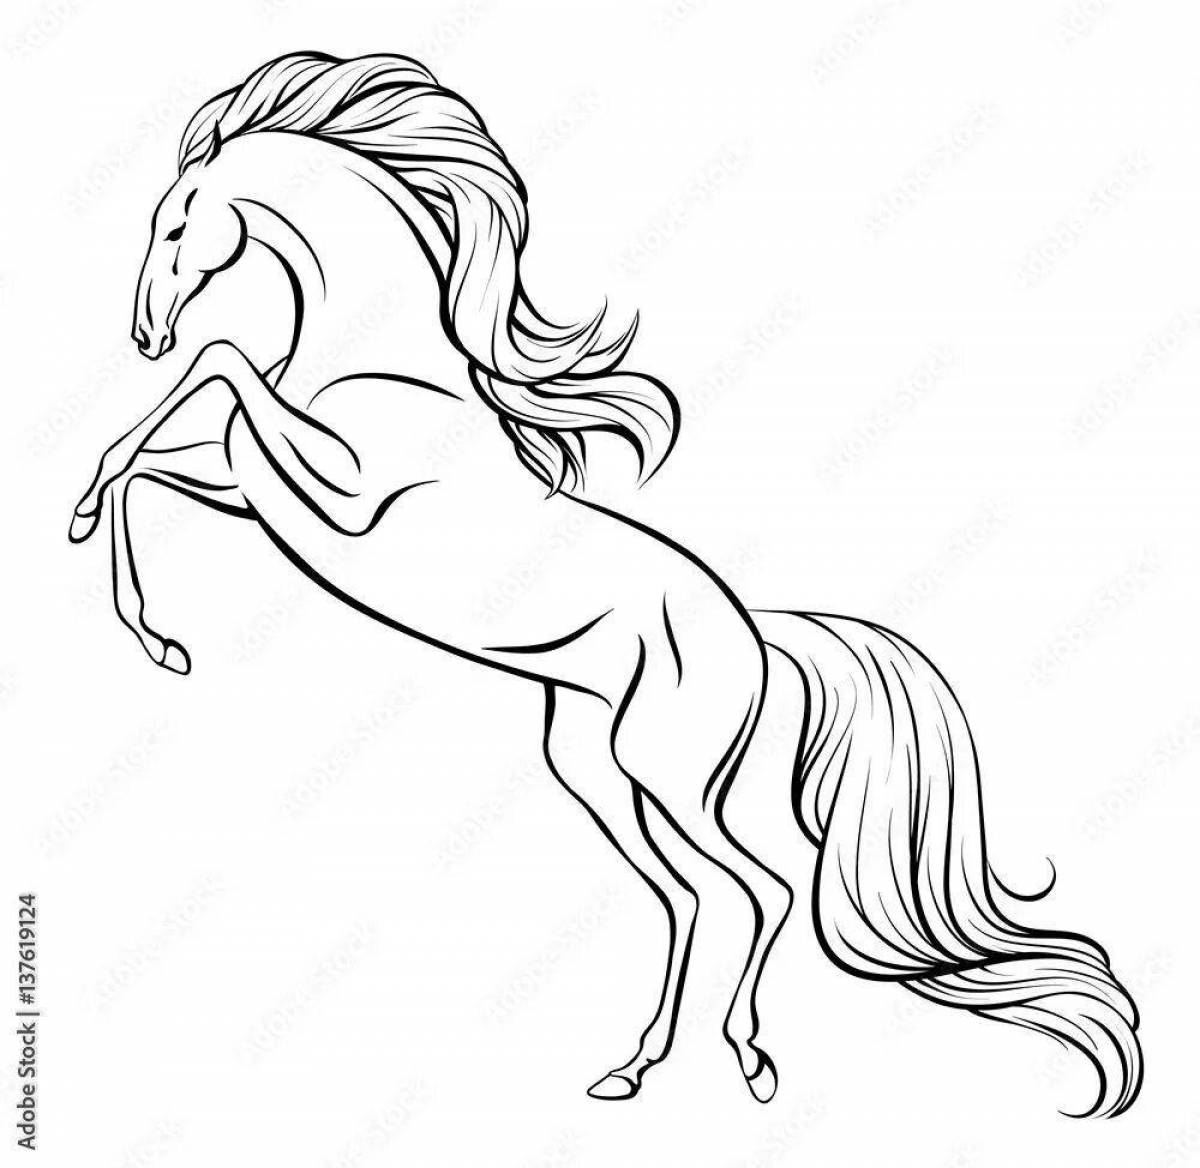 Coloring page shiny rearing horse